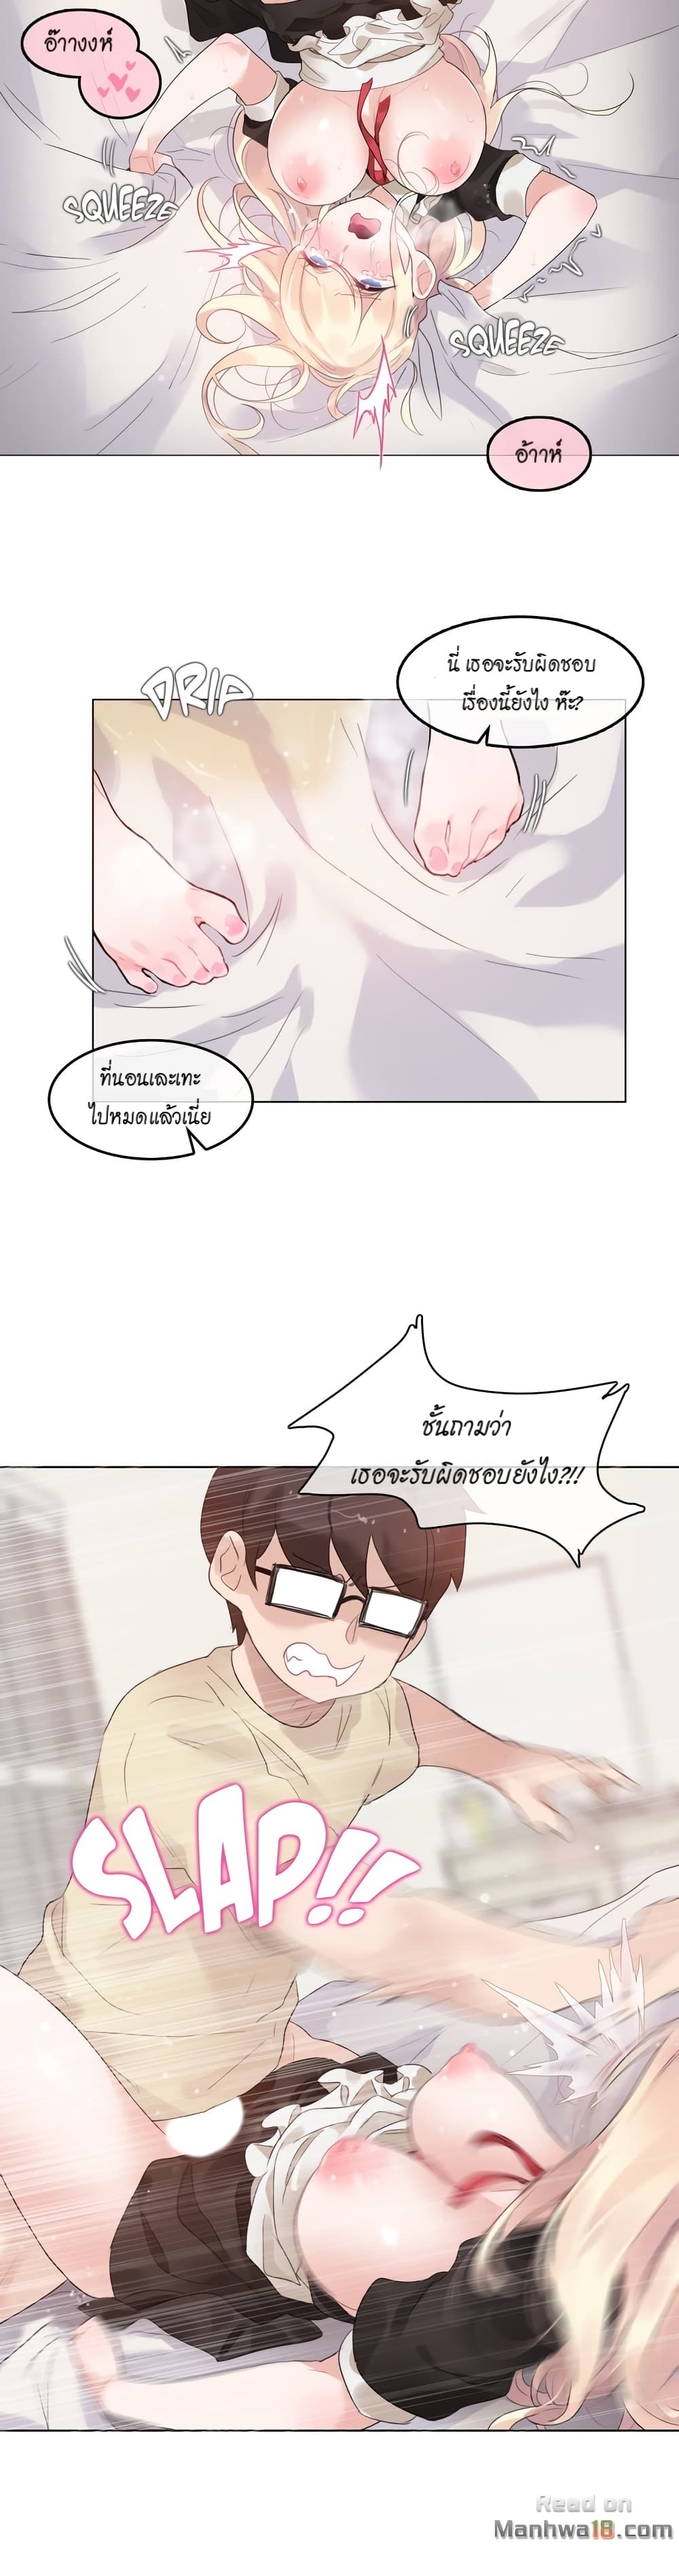 A Pervert's Daily Life 71-71 (จบ SS1)